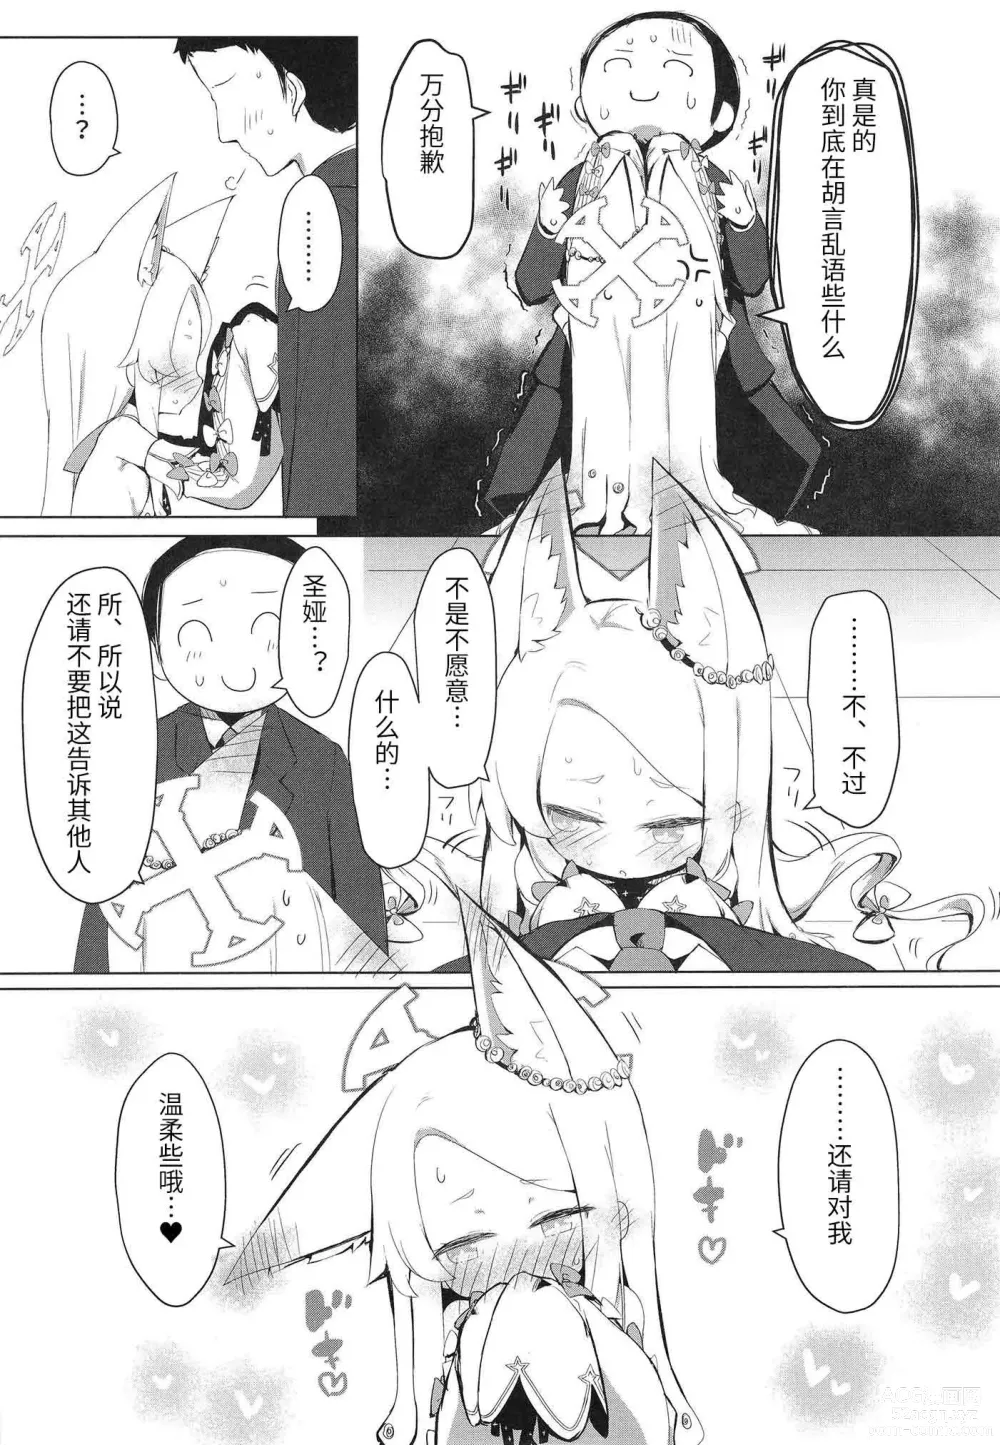 Page 7 of doujinshi 抱歉的发情圣娅